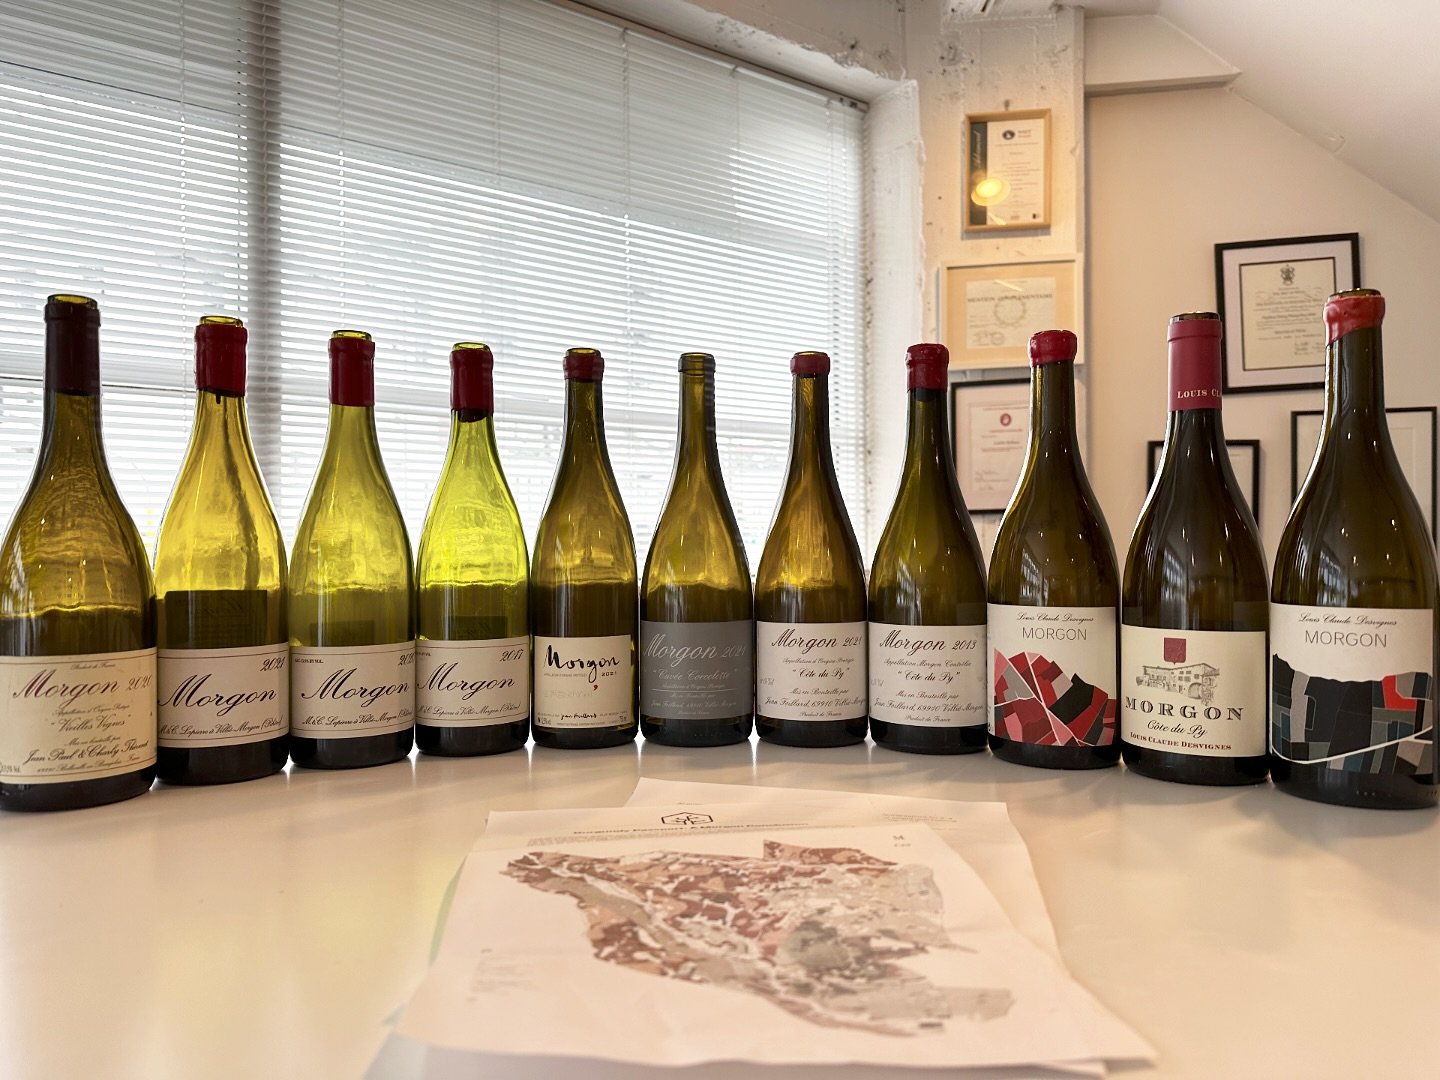 On Monday, we held the last Burgundy Passport to be hosted on Vivian St. and it was fitting that the journey returned to Morgon, the Beaujolais Cru where the quality revolution (and the natural wine movement) began. With both horizontals and vertical